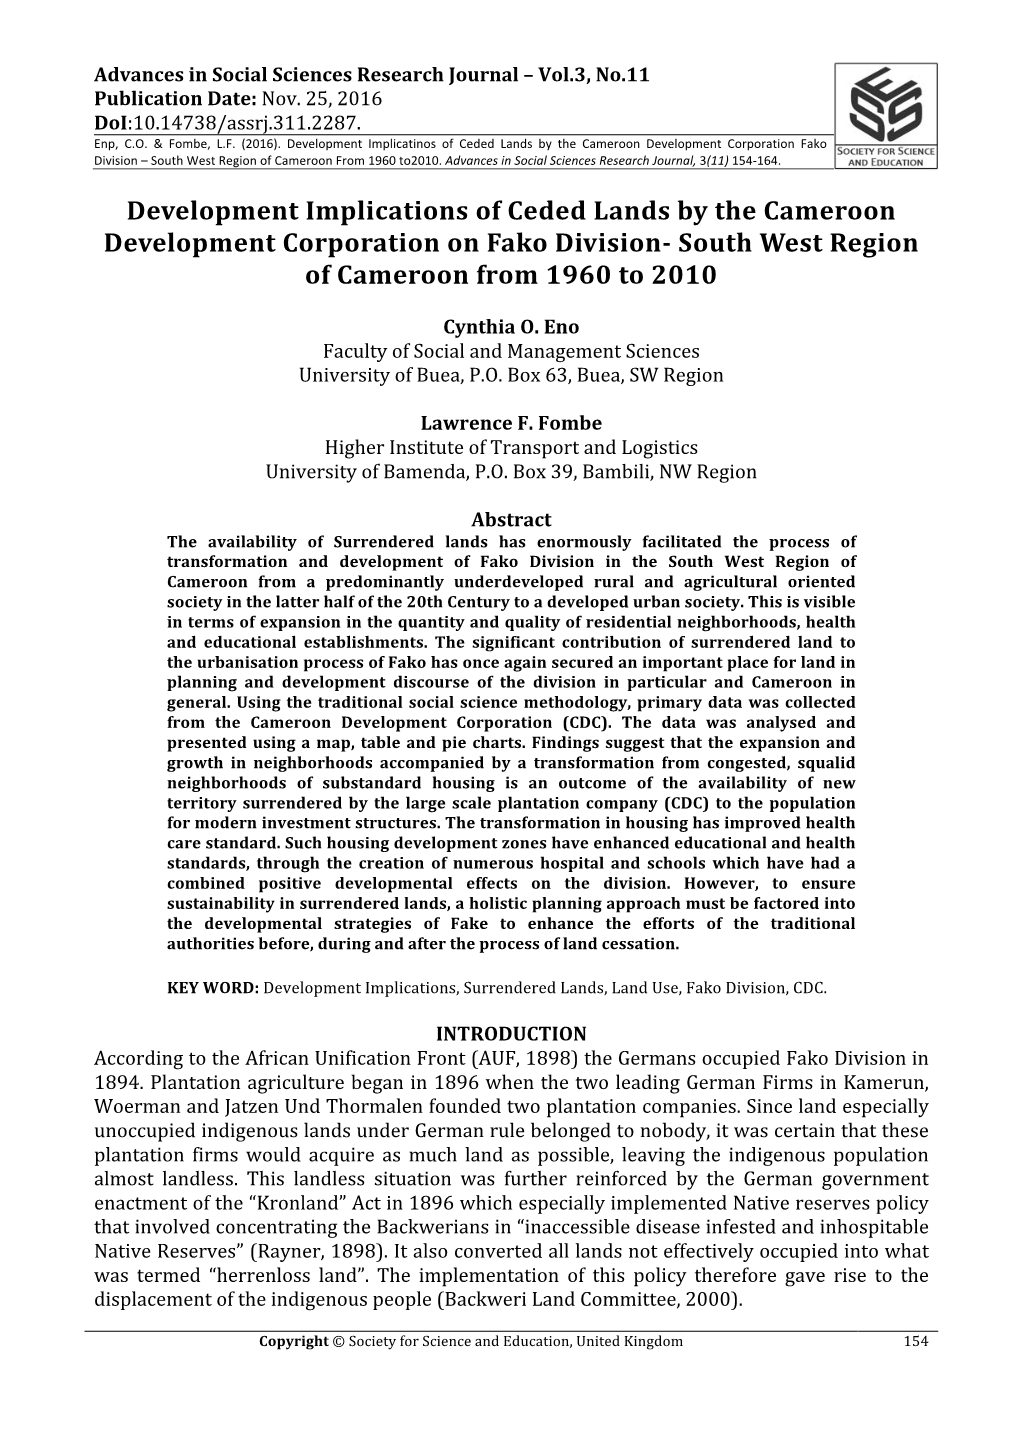 Development Implications of Ceded Lands by the Cameroon Development Corporation on Fako Division- South West Region of Cameroon from 1960 to 2010